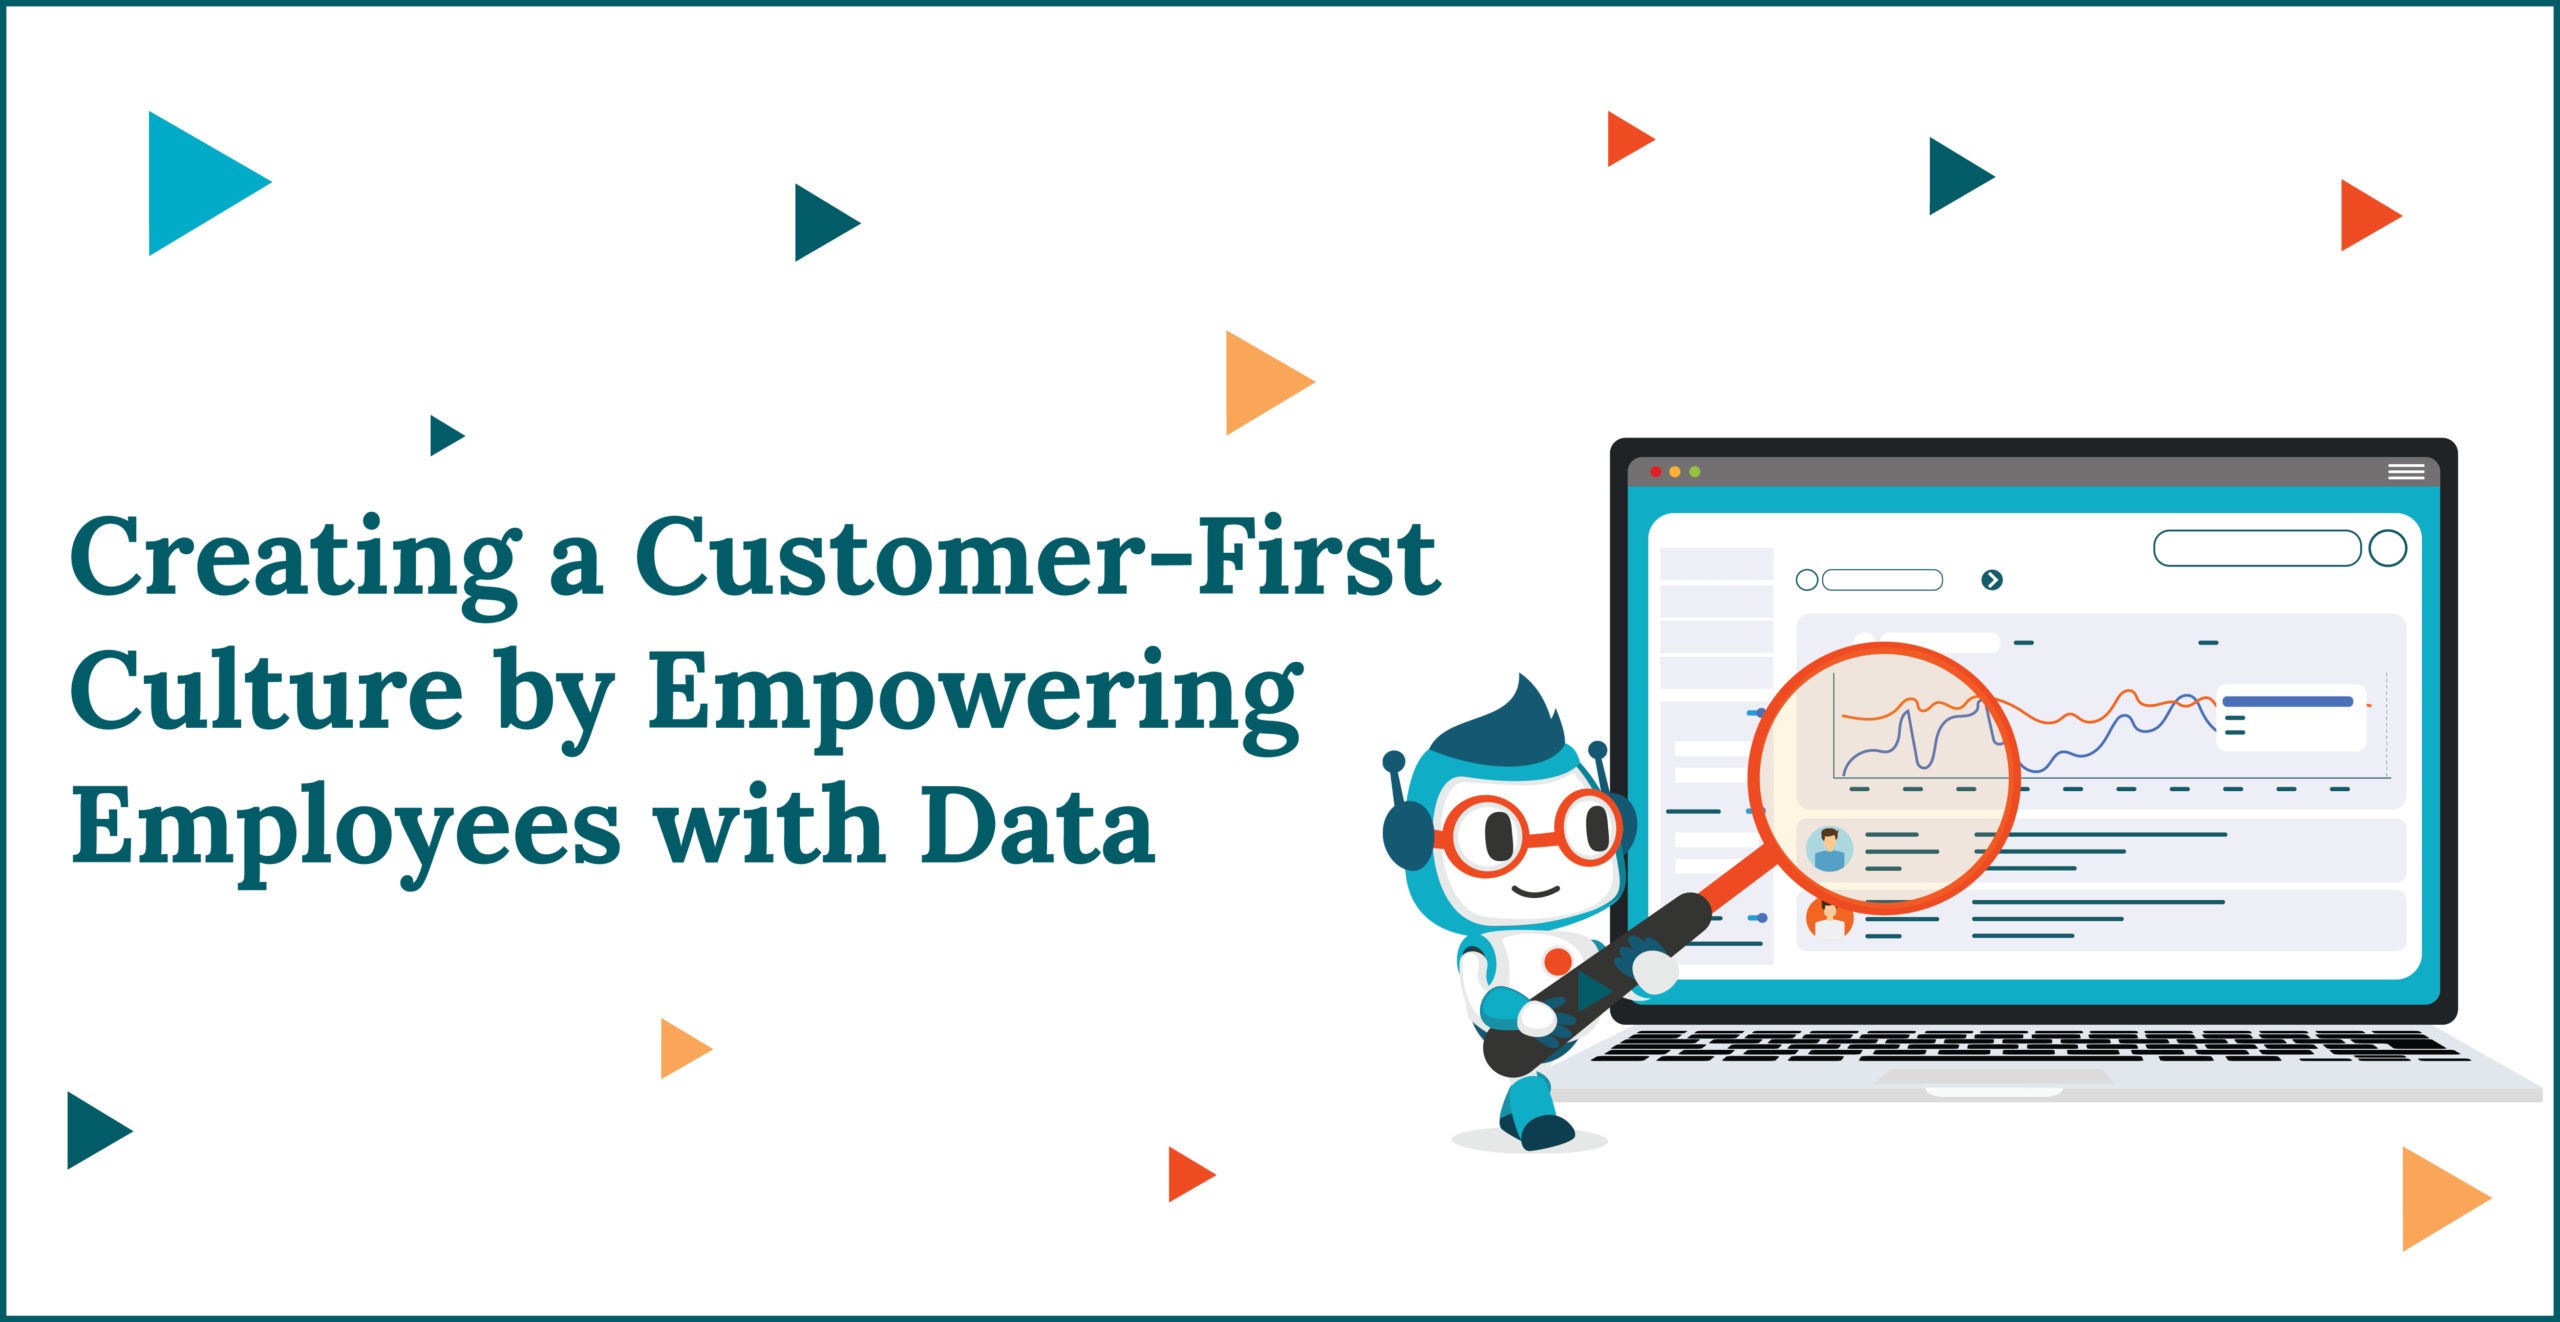 Creating a Customer-First Culture by Empowering Employees with Data